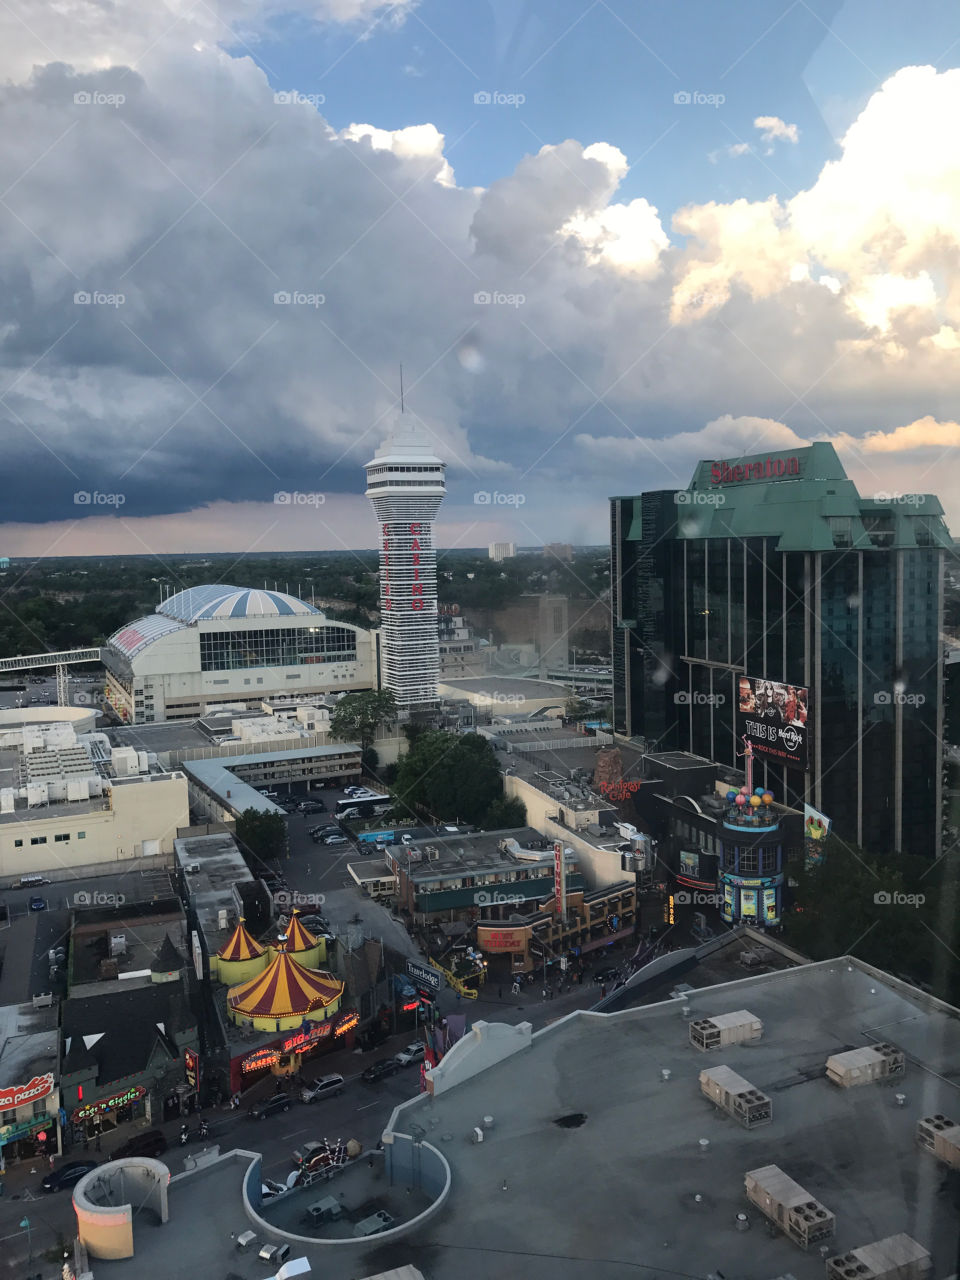 A view of our Canadian hotel from the Ferris wheel 